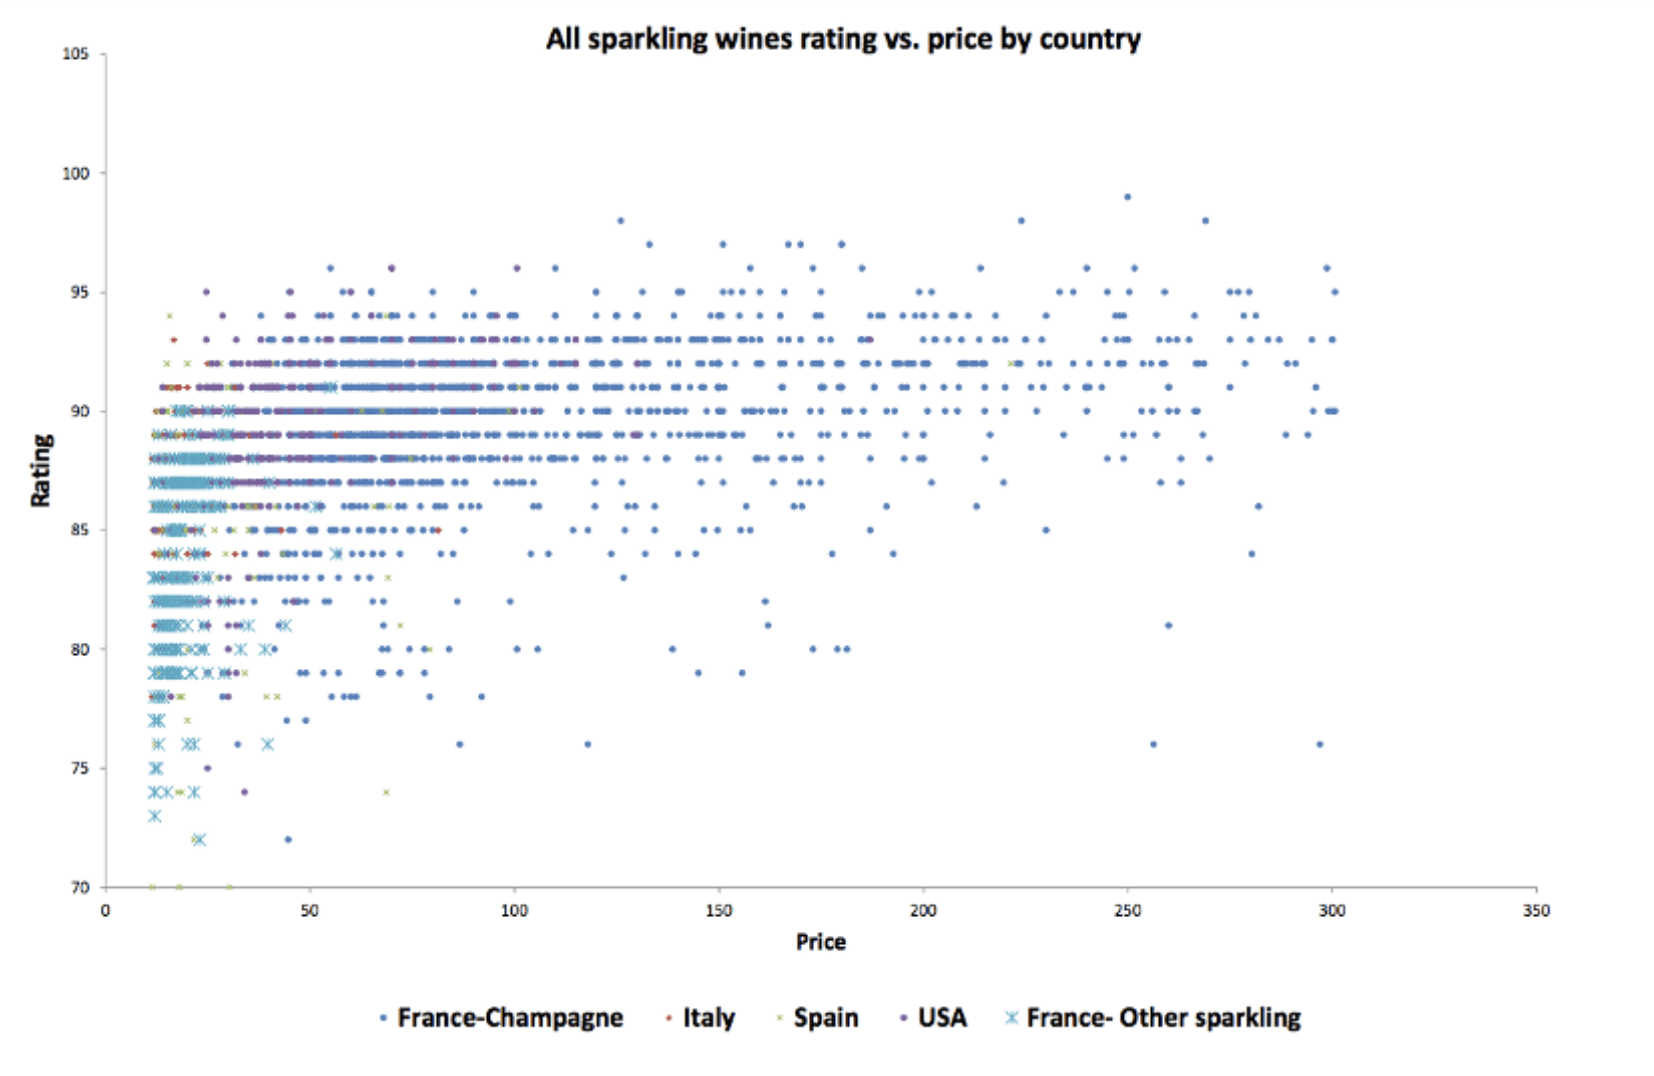 All sparkling wine rating vs. price by country (France-Champagne, Italy, Spain, US, France- other sparkling).